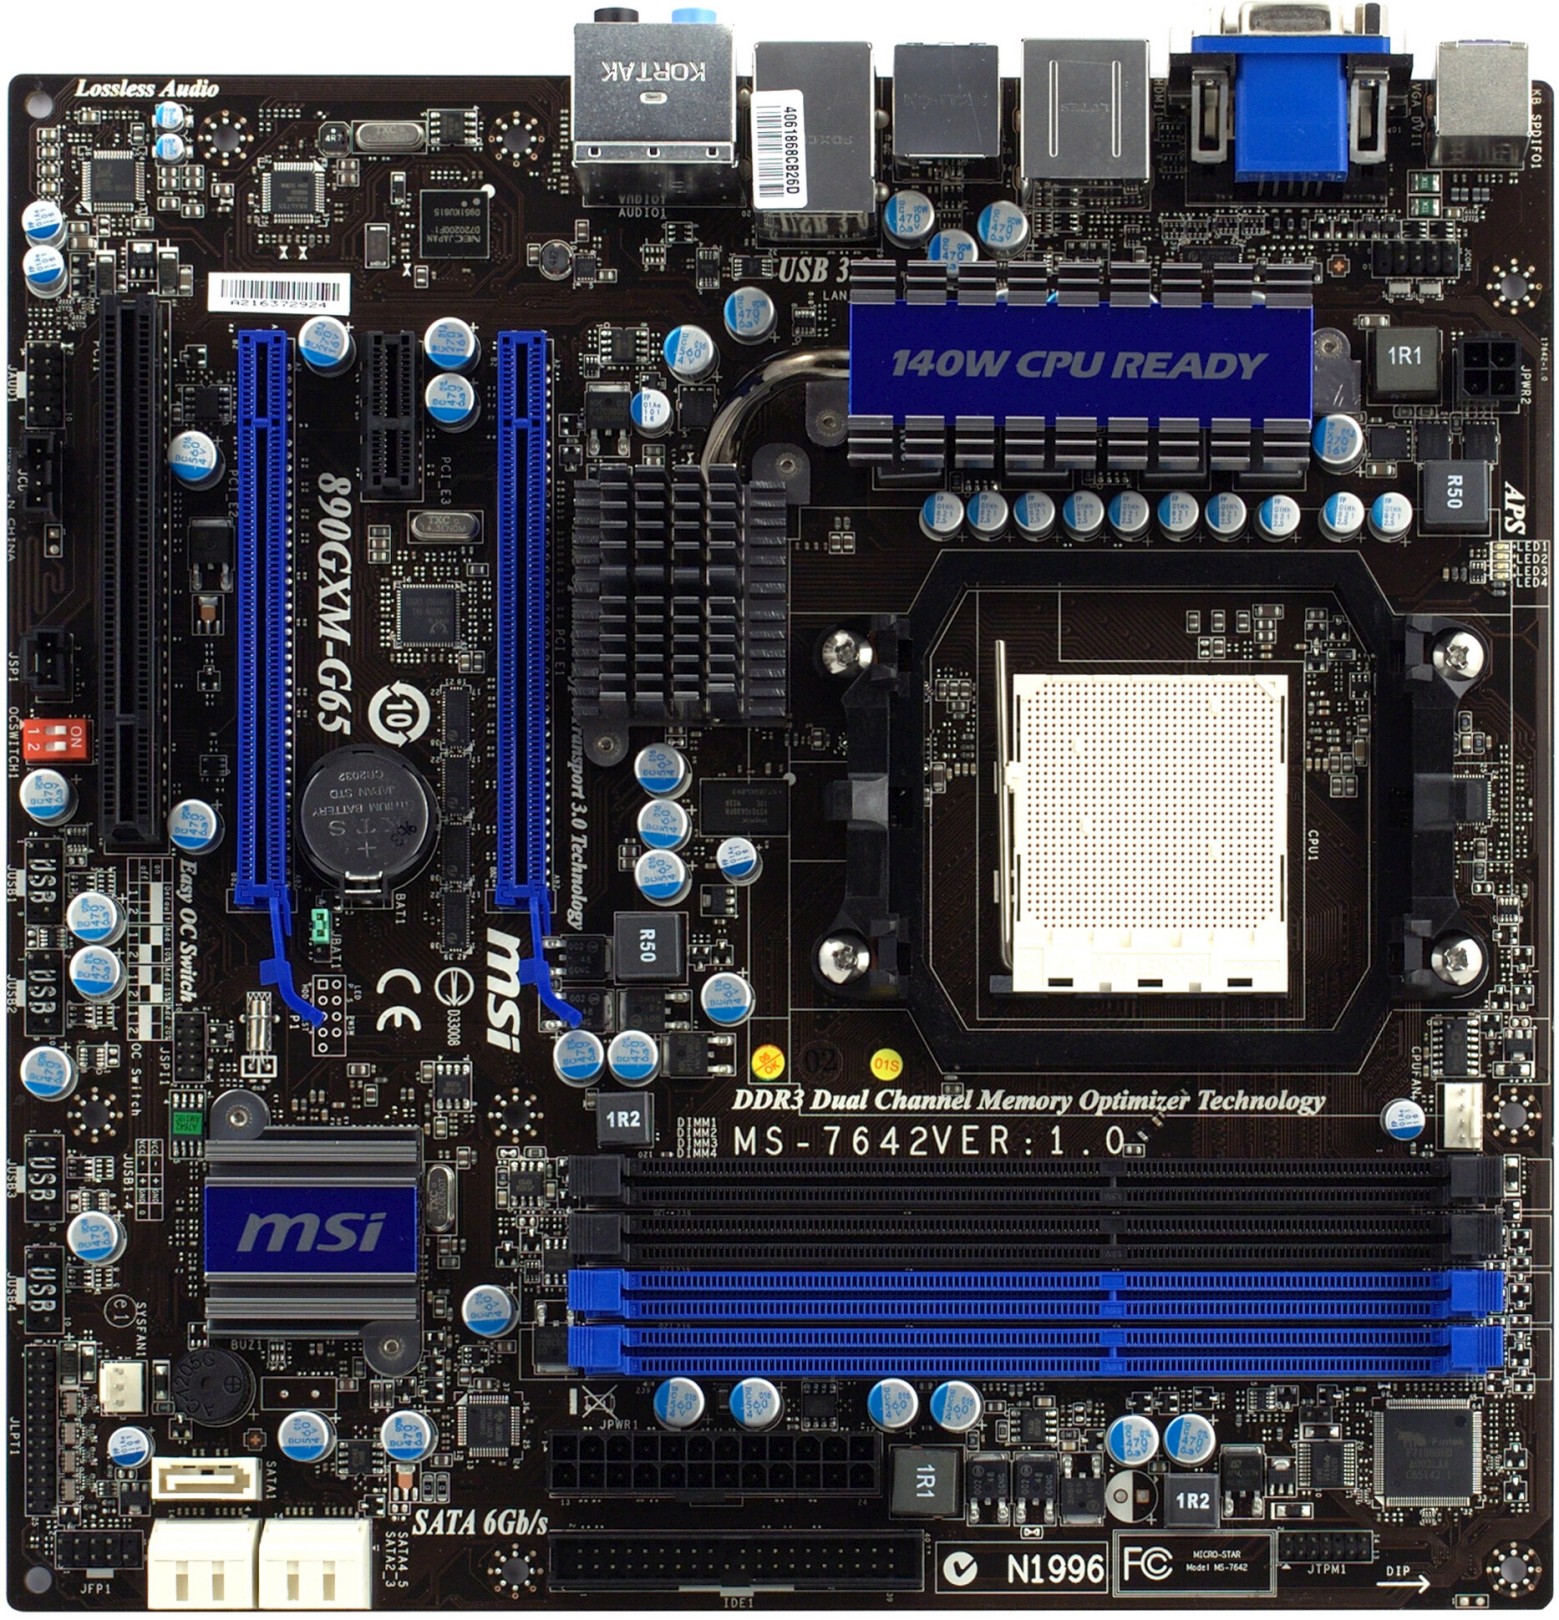 iXBT Labs - MSI 890GXM-G65 Motherboard - Page 1: Introduction, design